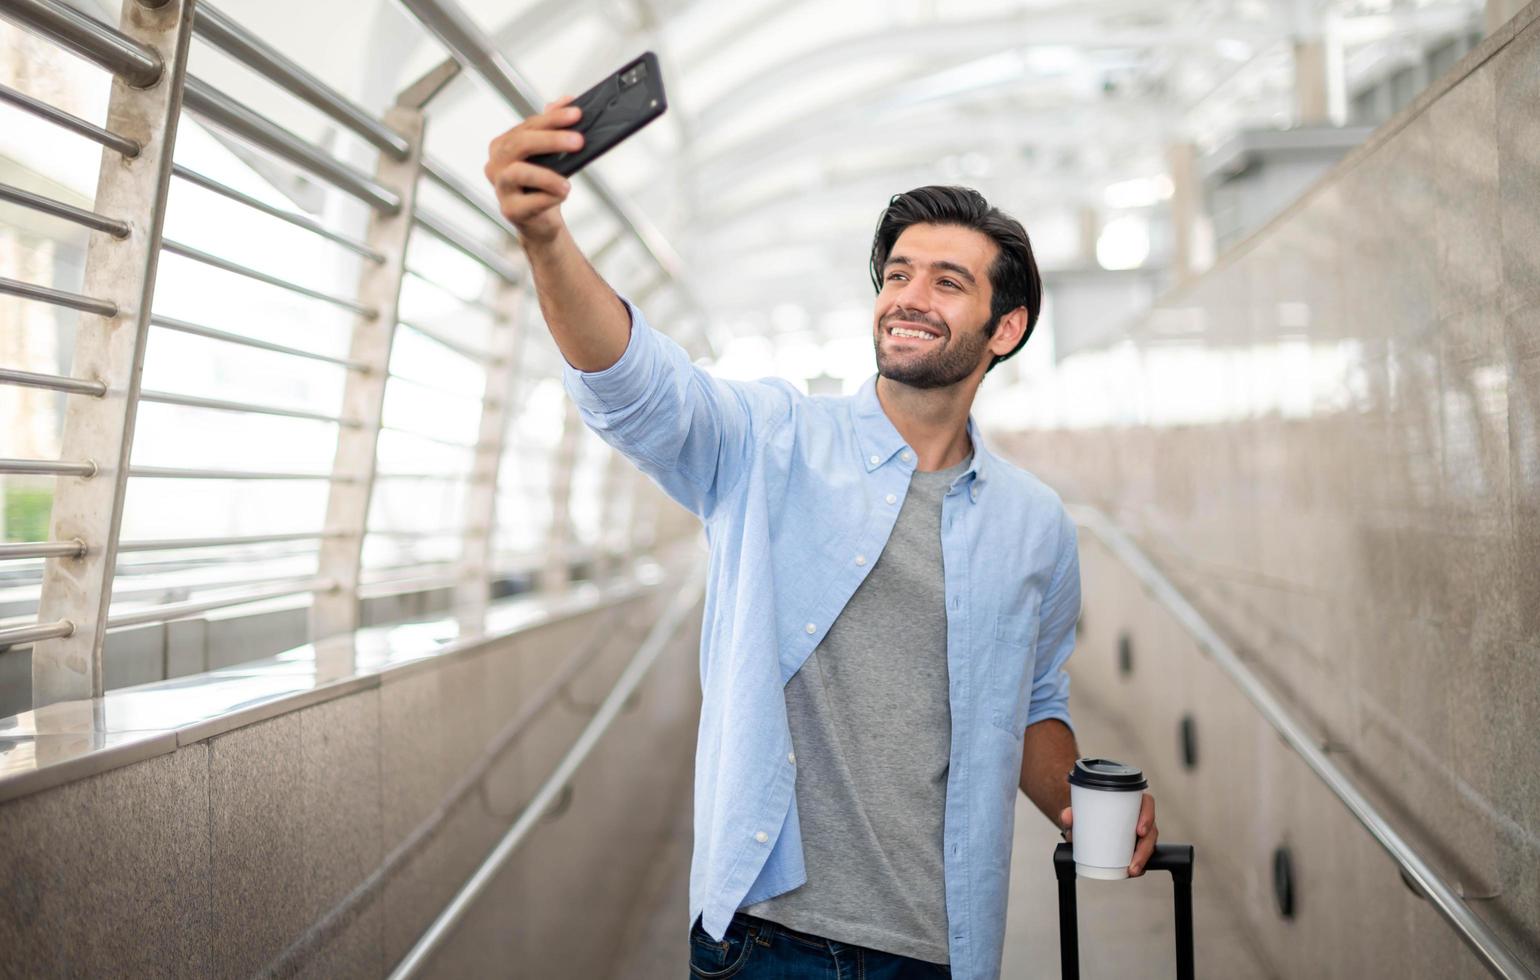 The man using smartphone selfies by himself while waiting their friend at the airport. photo